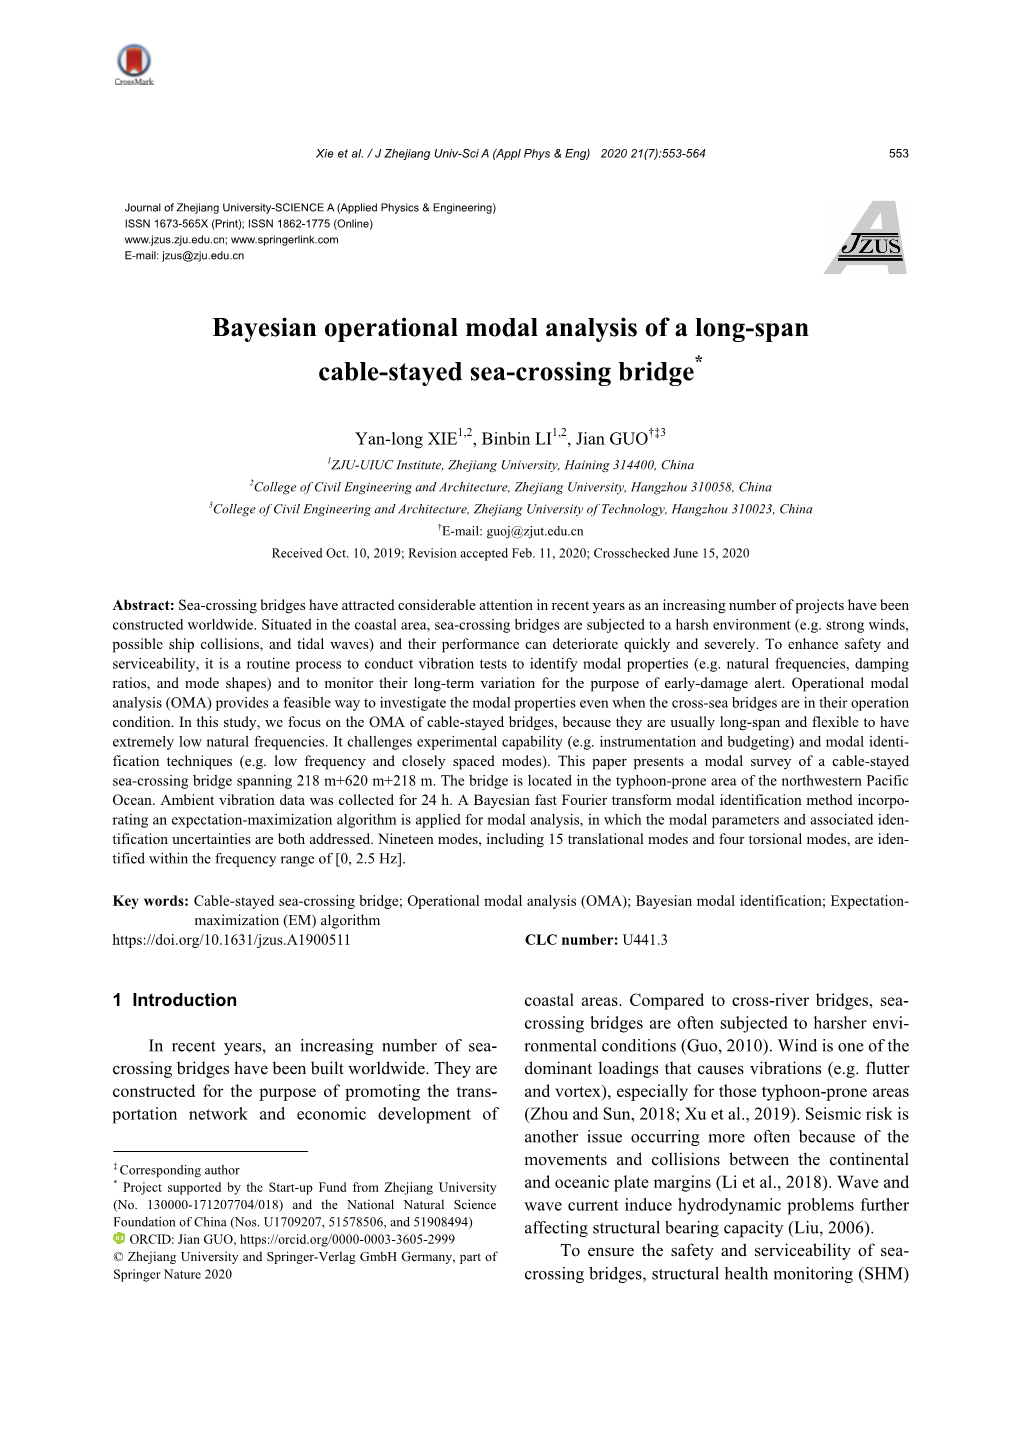 Bayesian Operational Modal Analysis of a Long-Span Cable-Stayed Sea-Crossing Bridge*